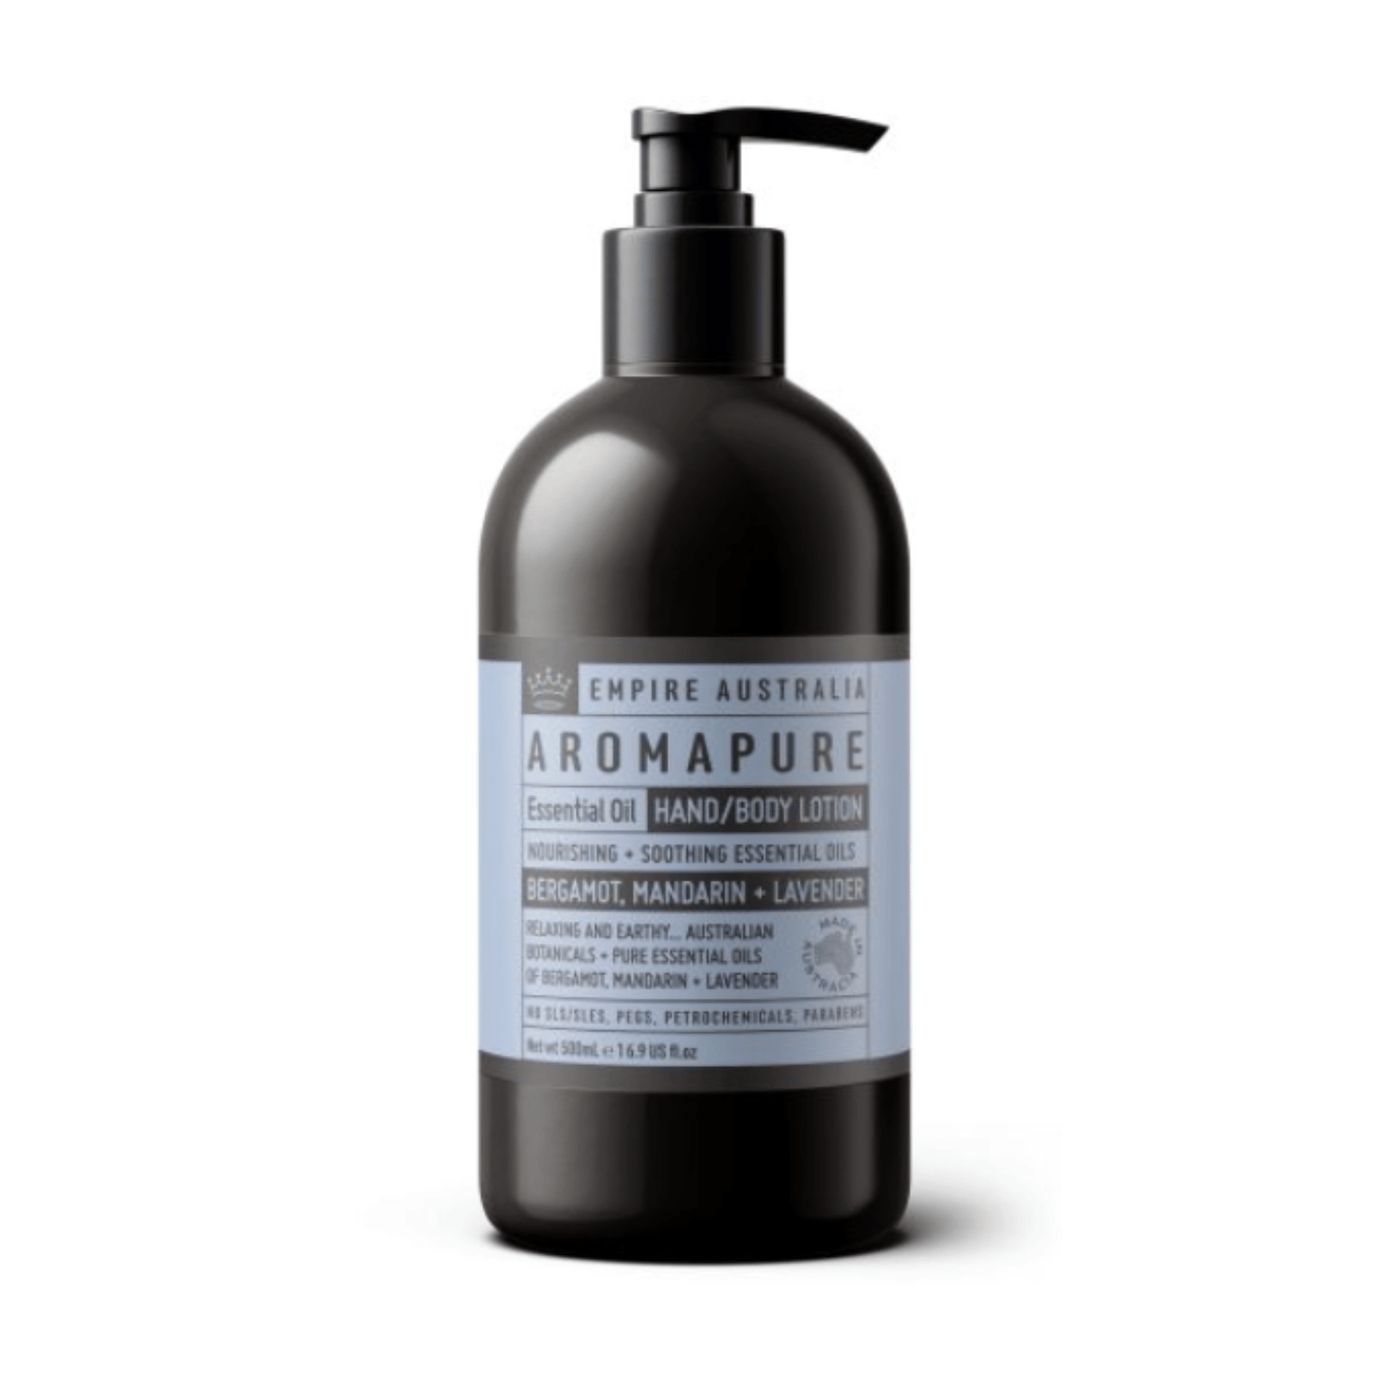 Aromapure Hand and Body Lotion